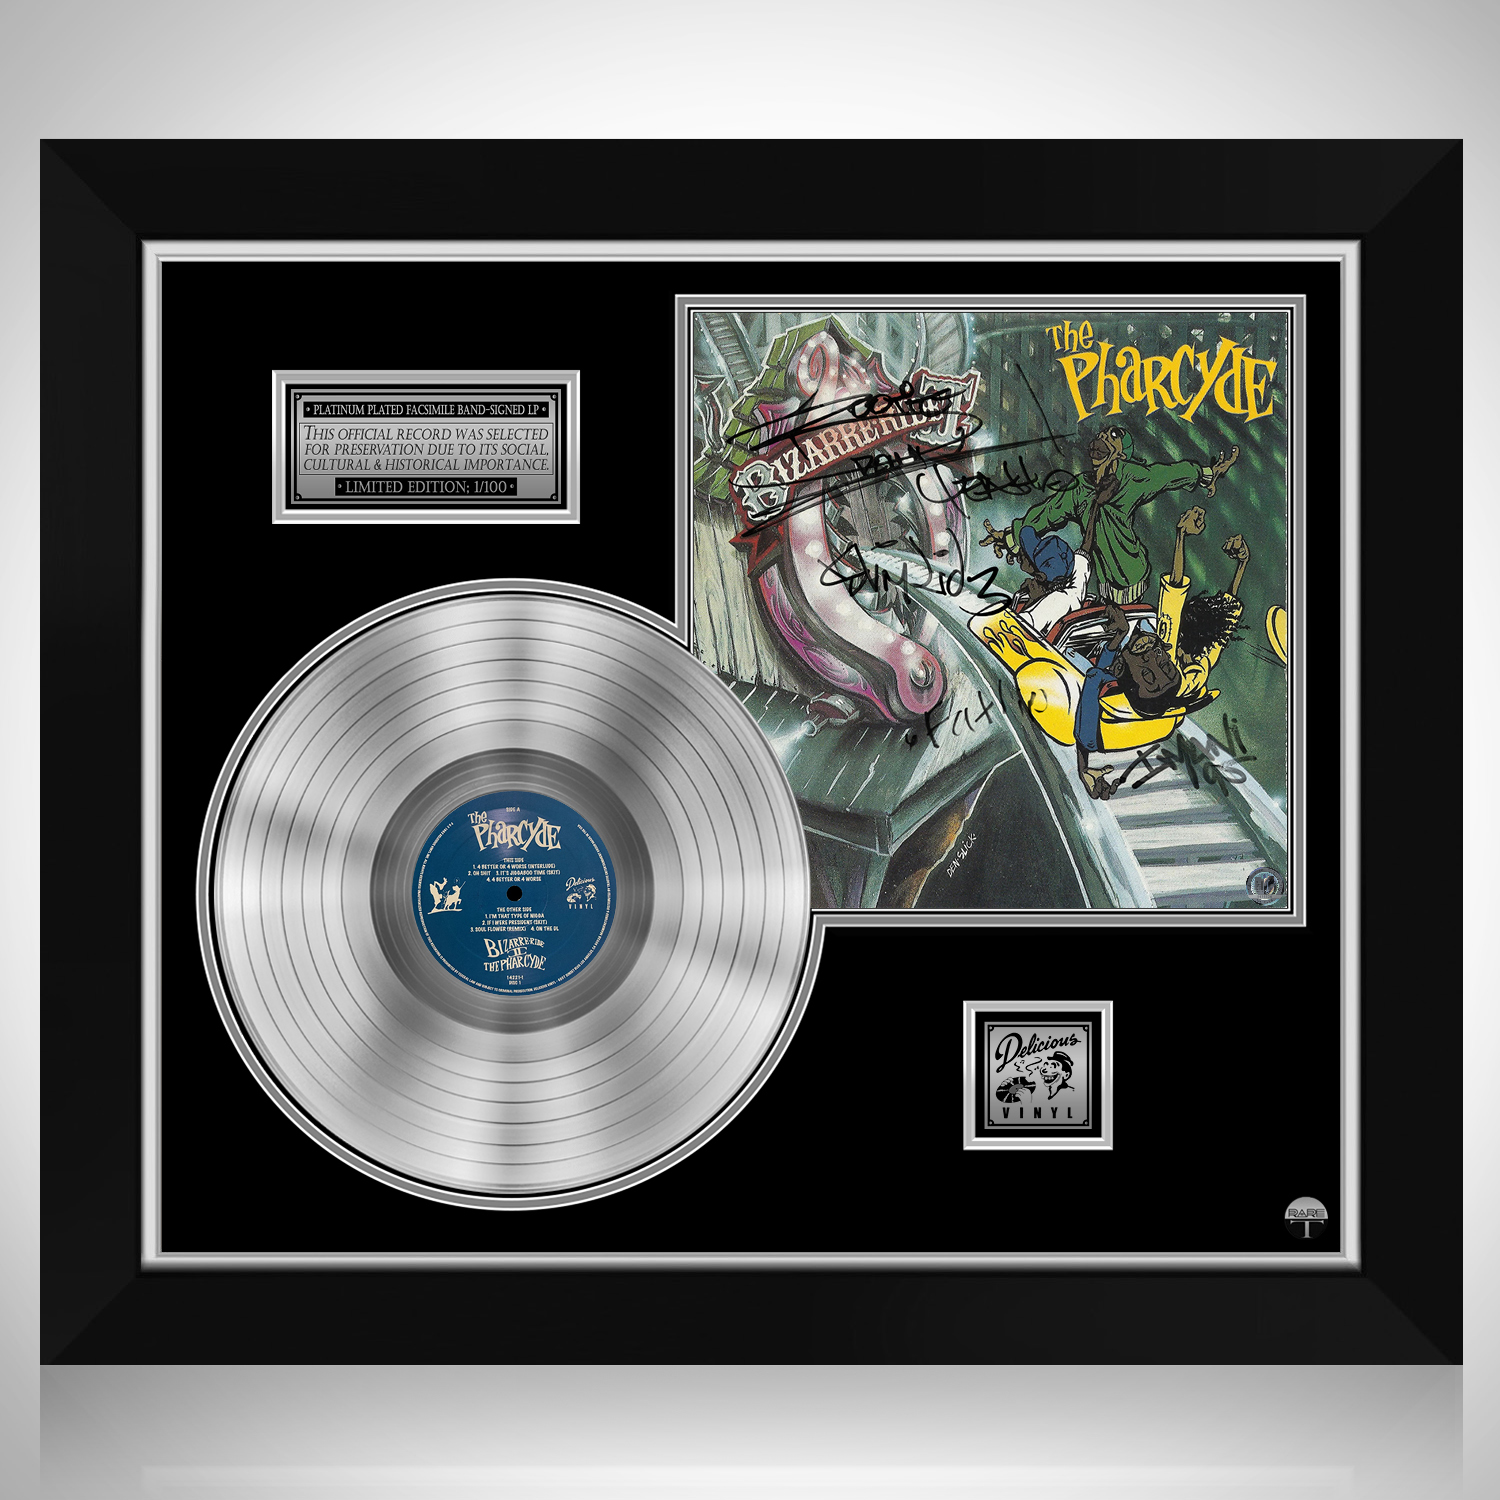 The Pharcyde - Bizarre Ride II the Pharcyde Platinum LP Limited 